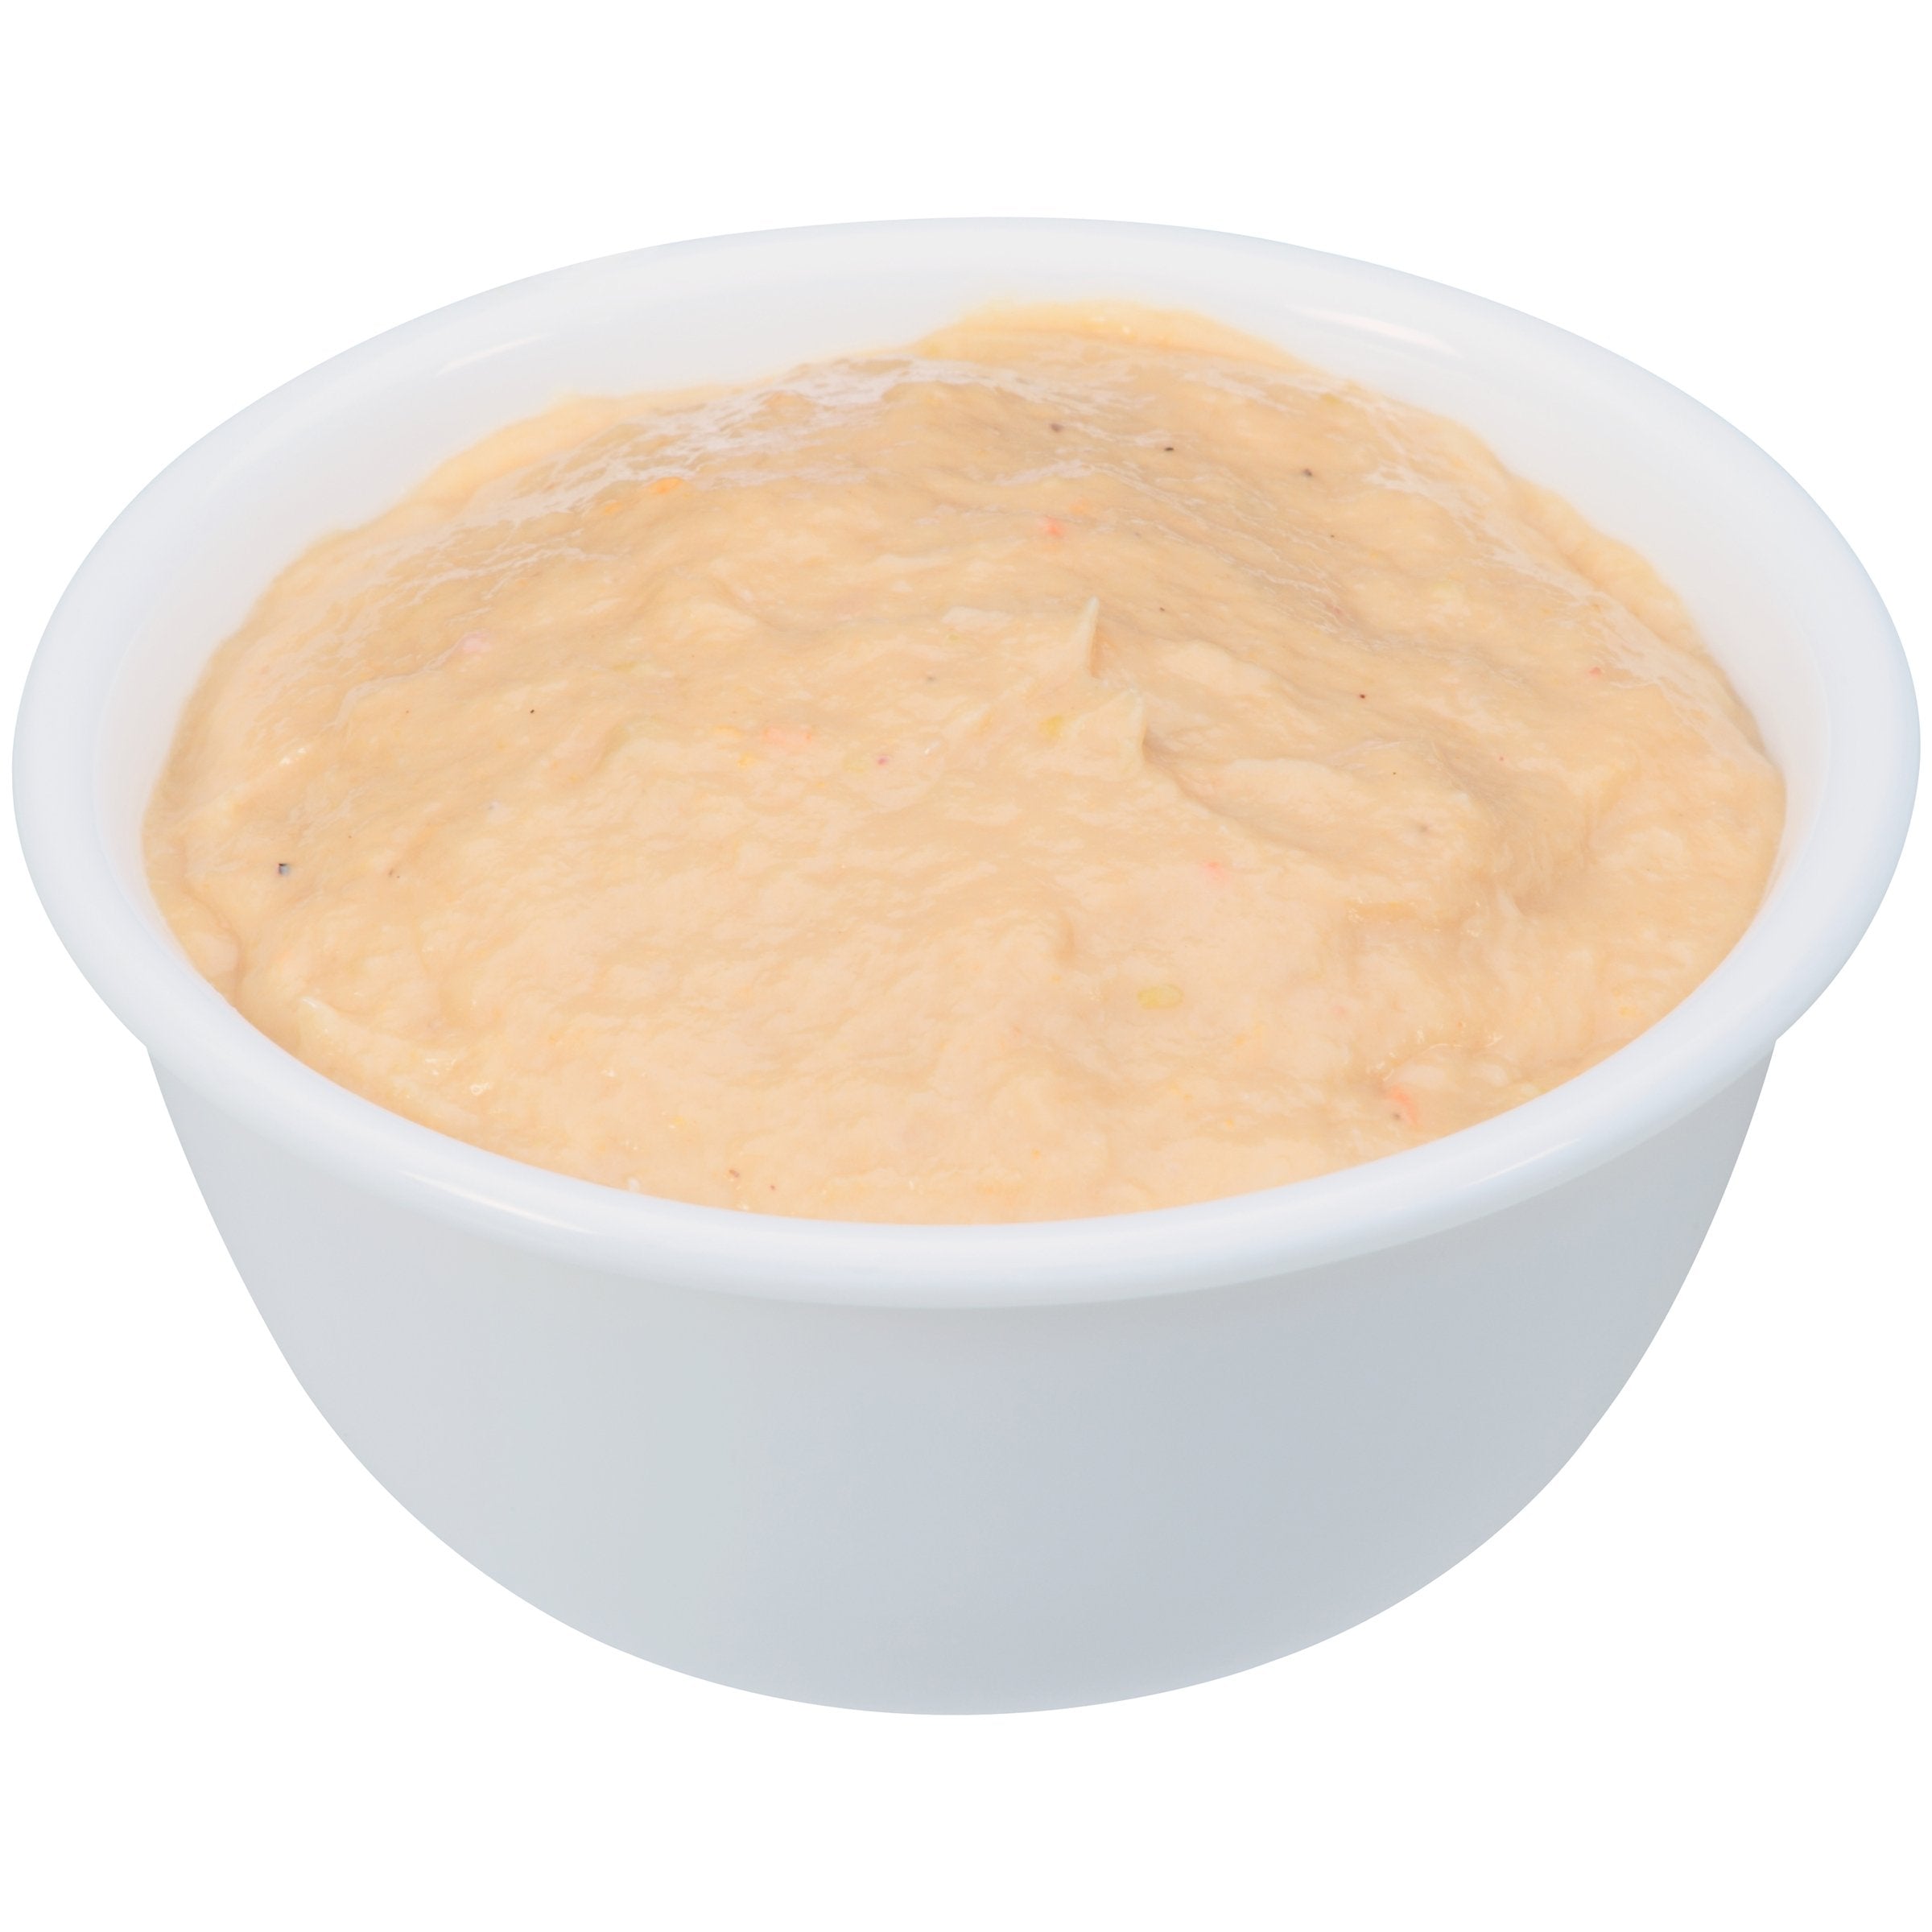 Thickened Food Thick-It 15 oz. Can Chicken  la King Flavor Puree IDDSI Level 4 Extremely Thick/Pureed